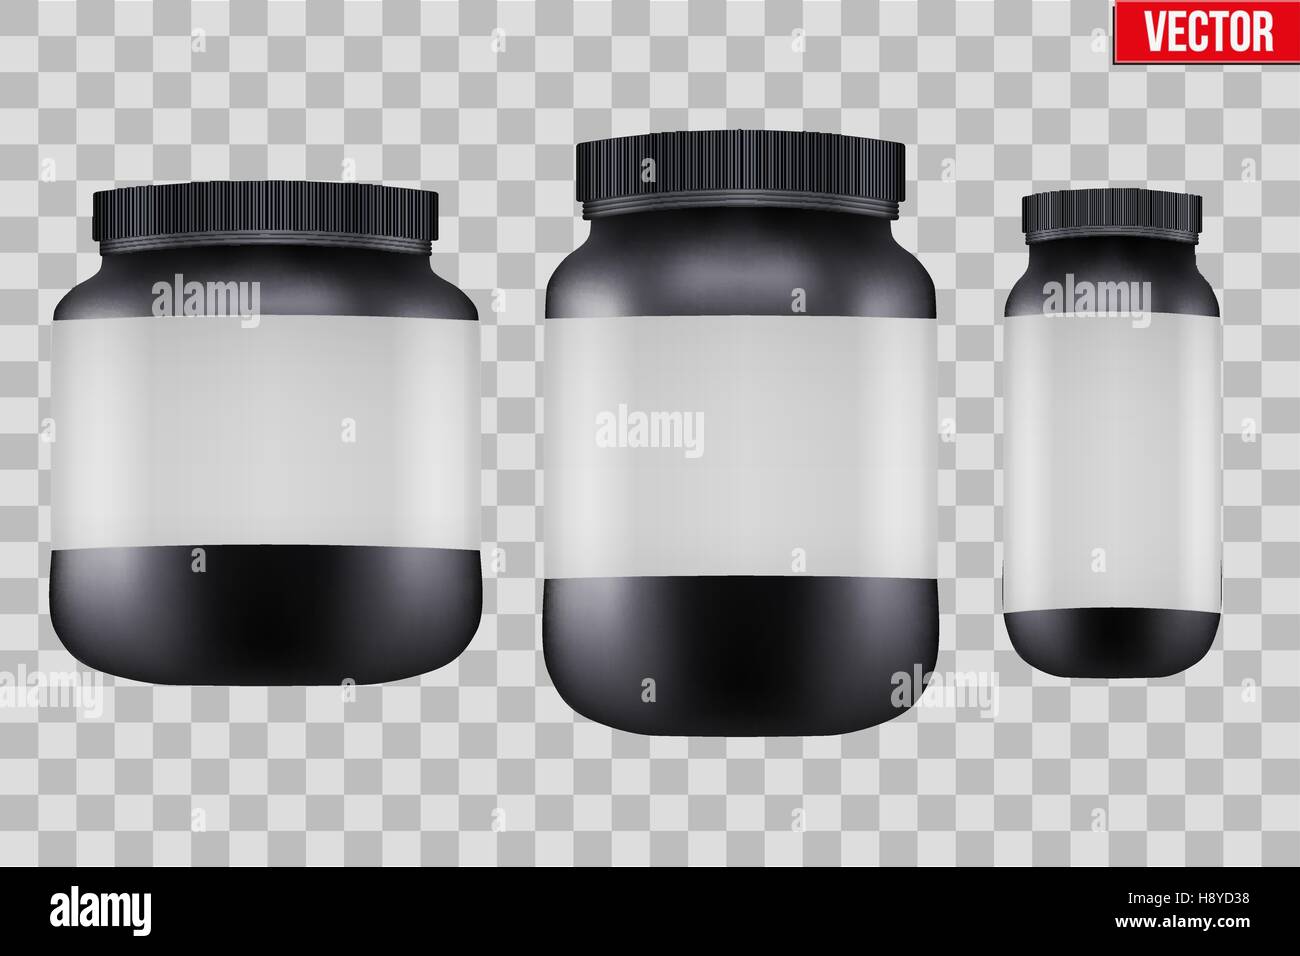 Black Protein Powder Container With Red Lid Sport Food Bottles Vector  Mockup Of Protein Sport Nutrition Jar Illustration Stock Illustration -  Download Image Now - iStock